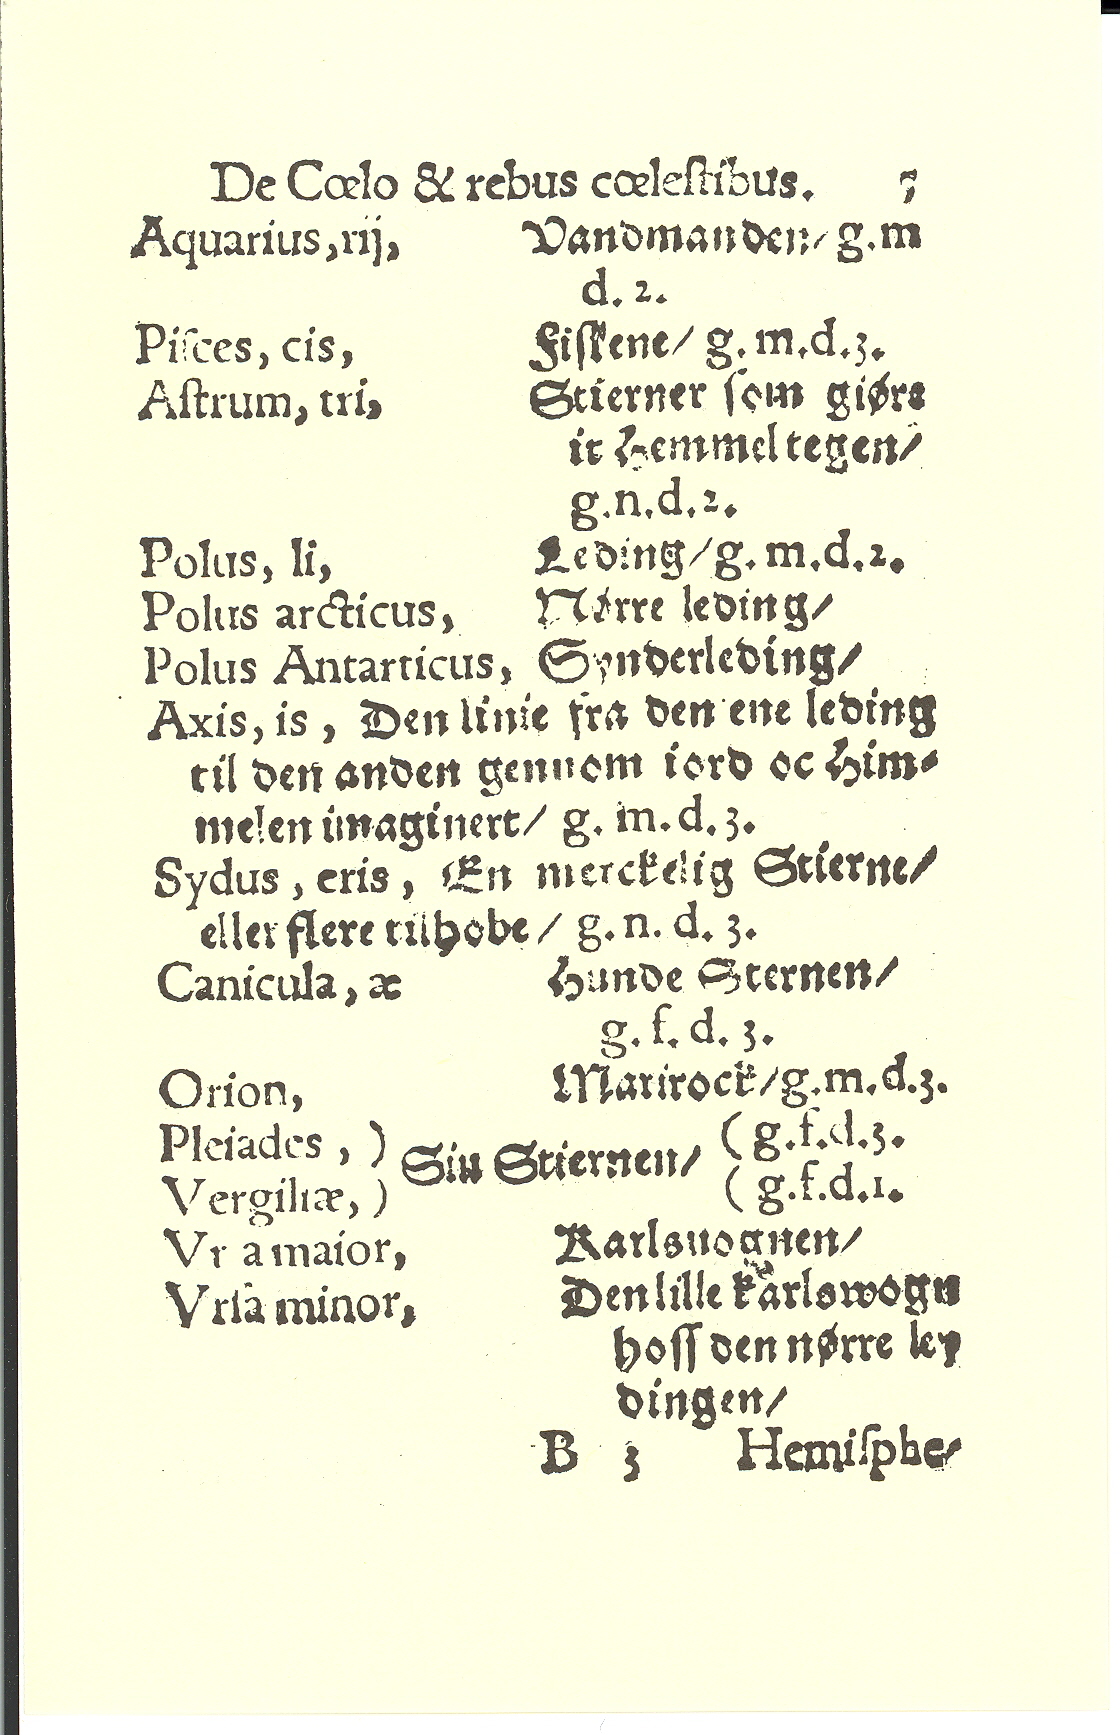 Smith 1563, Side: 5